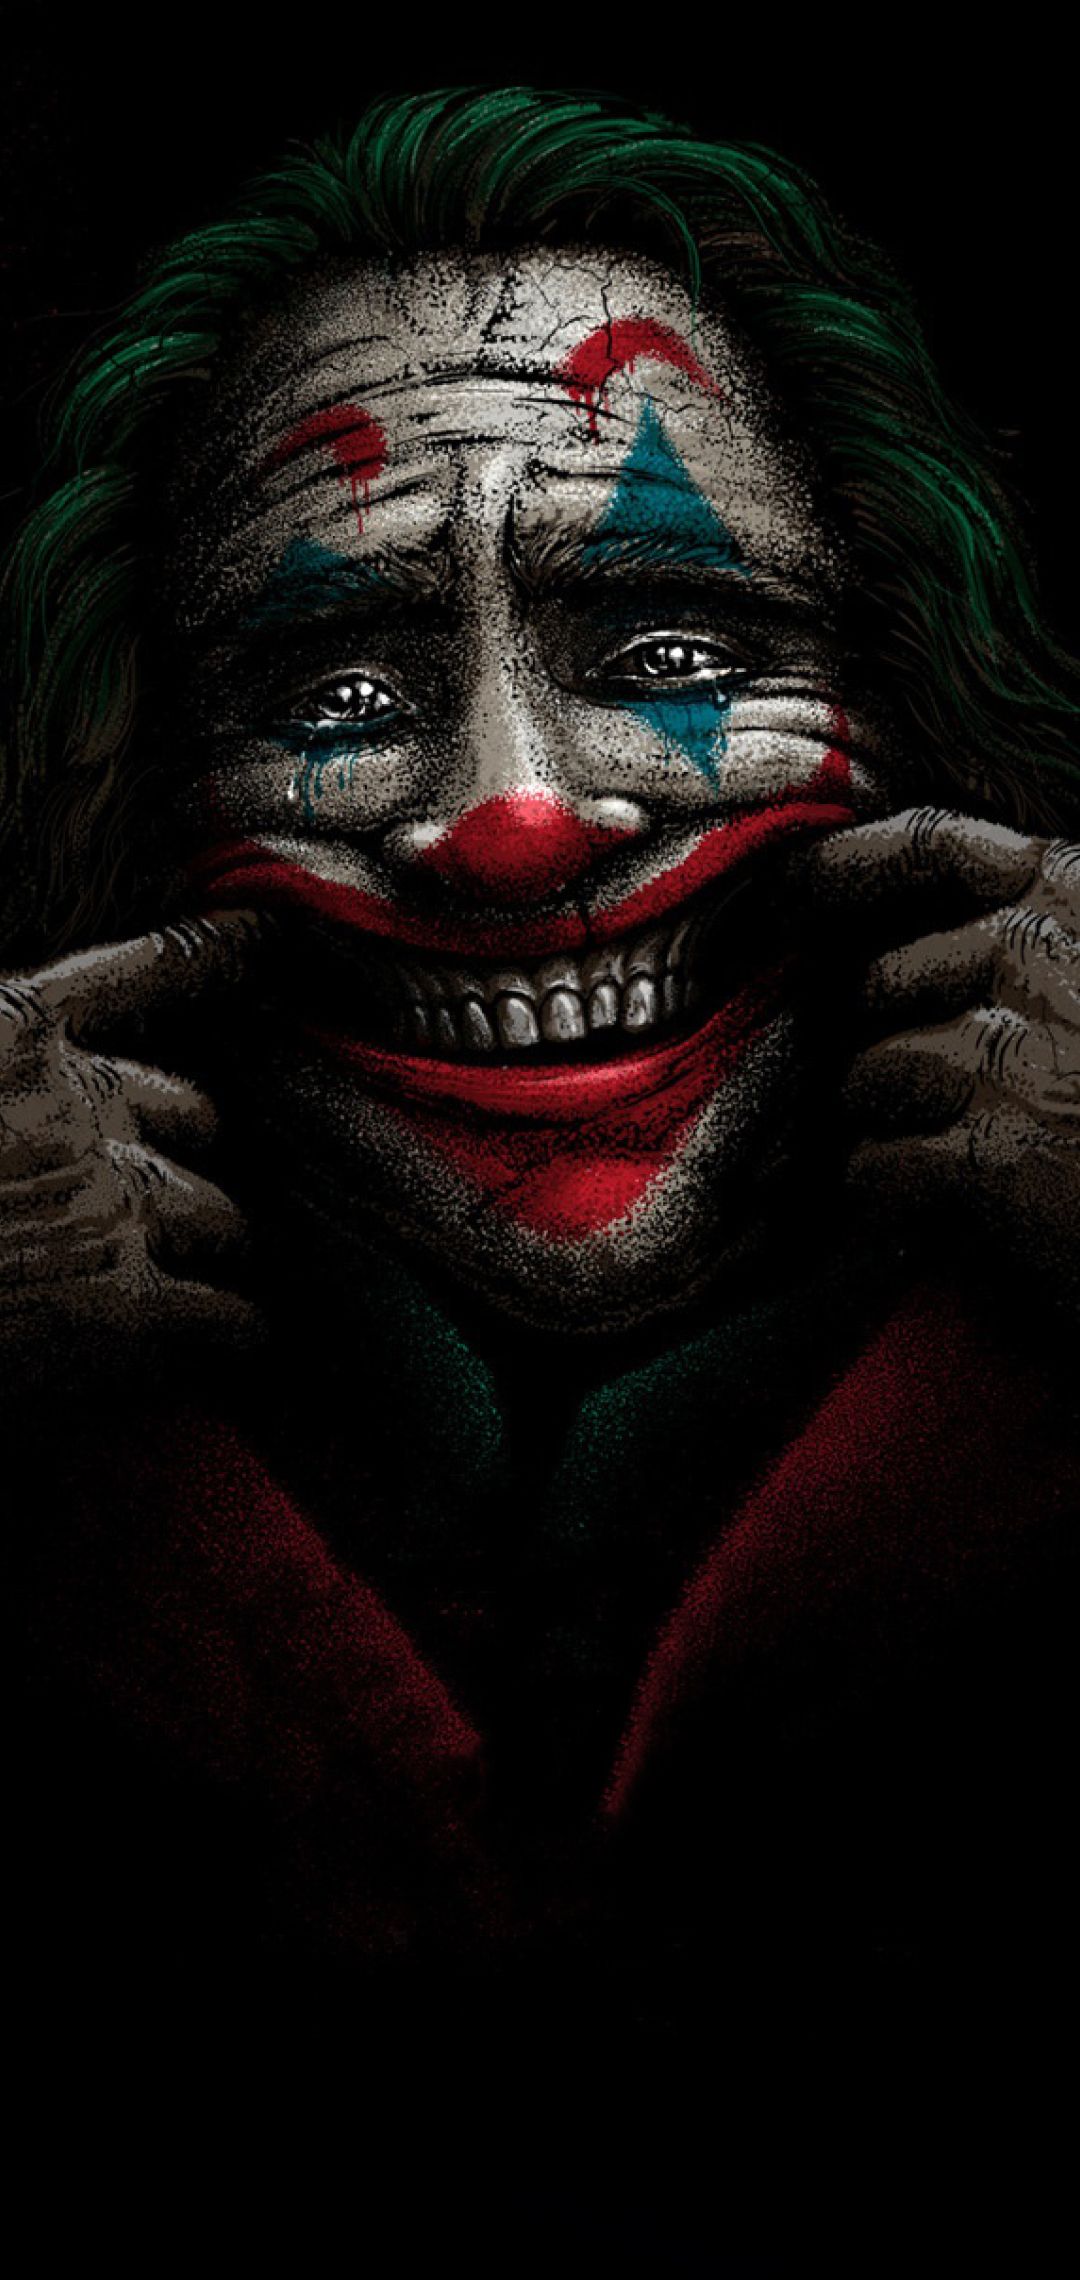 Joker Happy Face One Plus Huawei p Honor view Vivo y Oppo f Xiaomi Mi A2 Wallpaper, HD Superheroes 4K Wallpaper, Image, Photo and Background